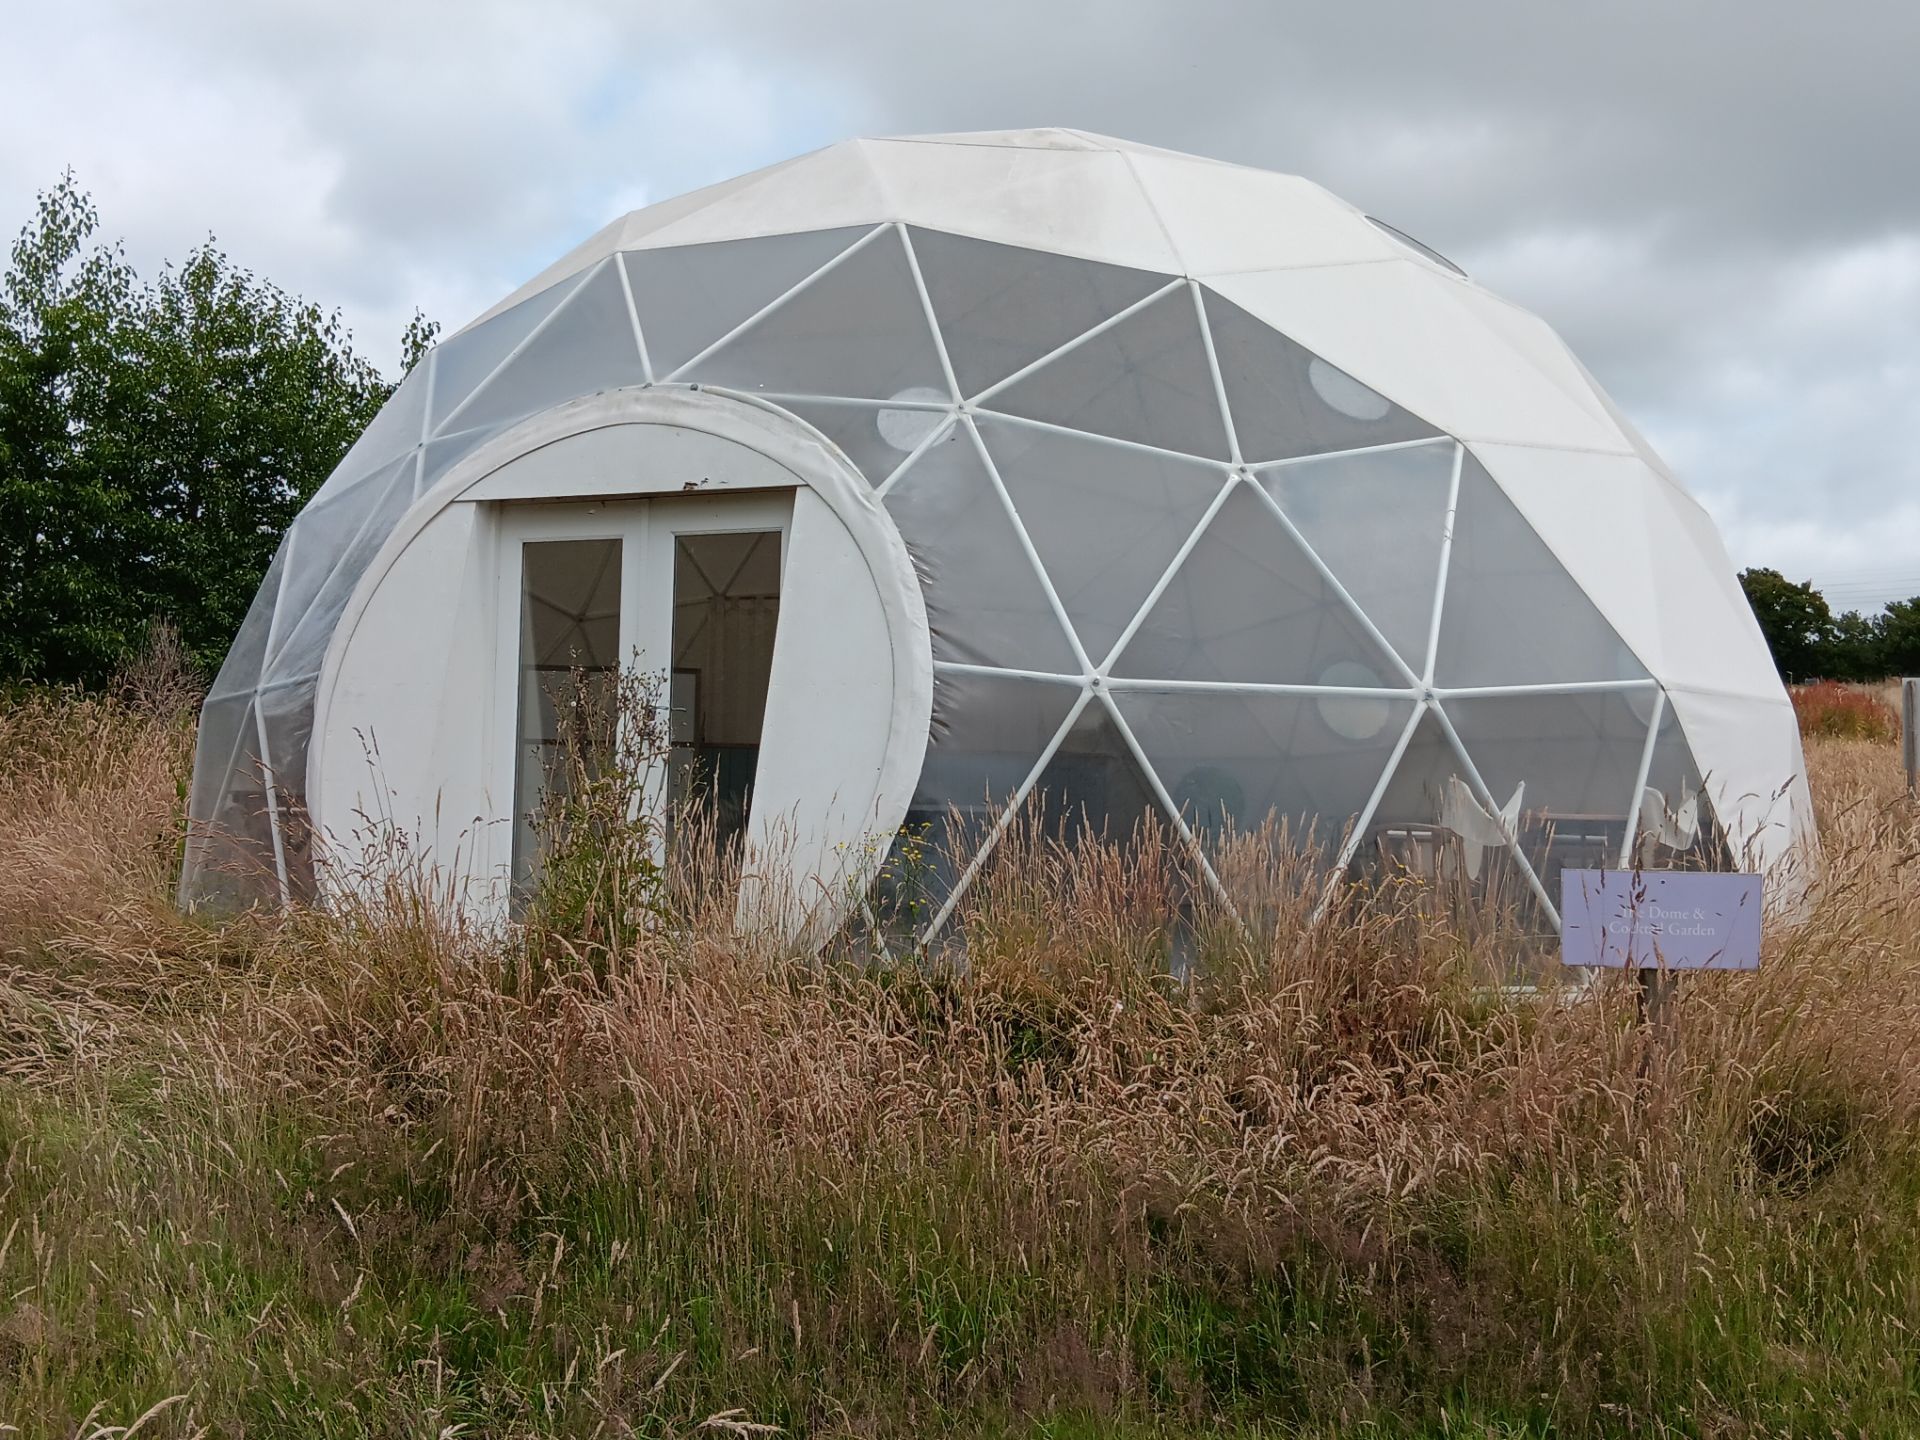 Pacific Domes 9m geodesic dome tent with furniture Viewing strongly recommended to establish - Image 2 of 6